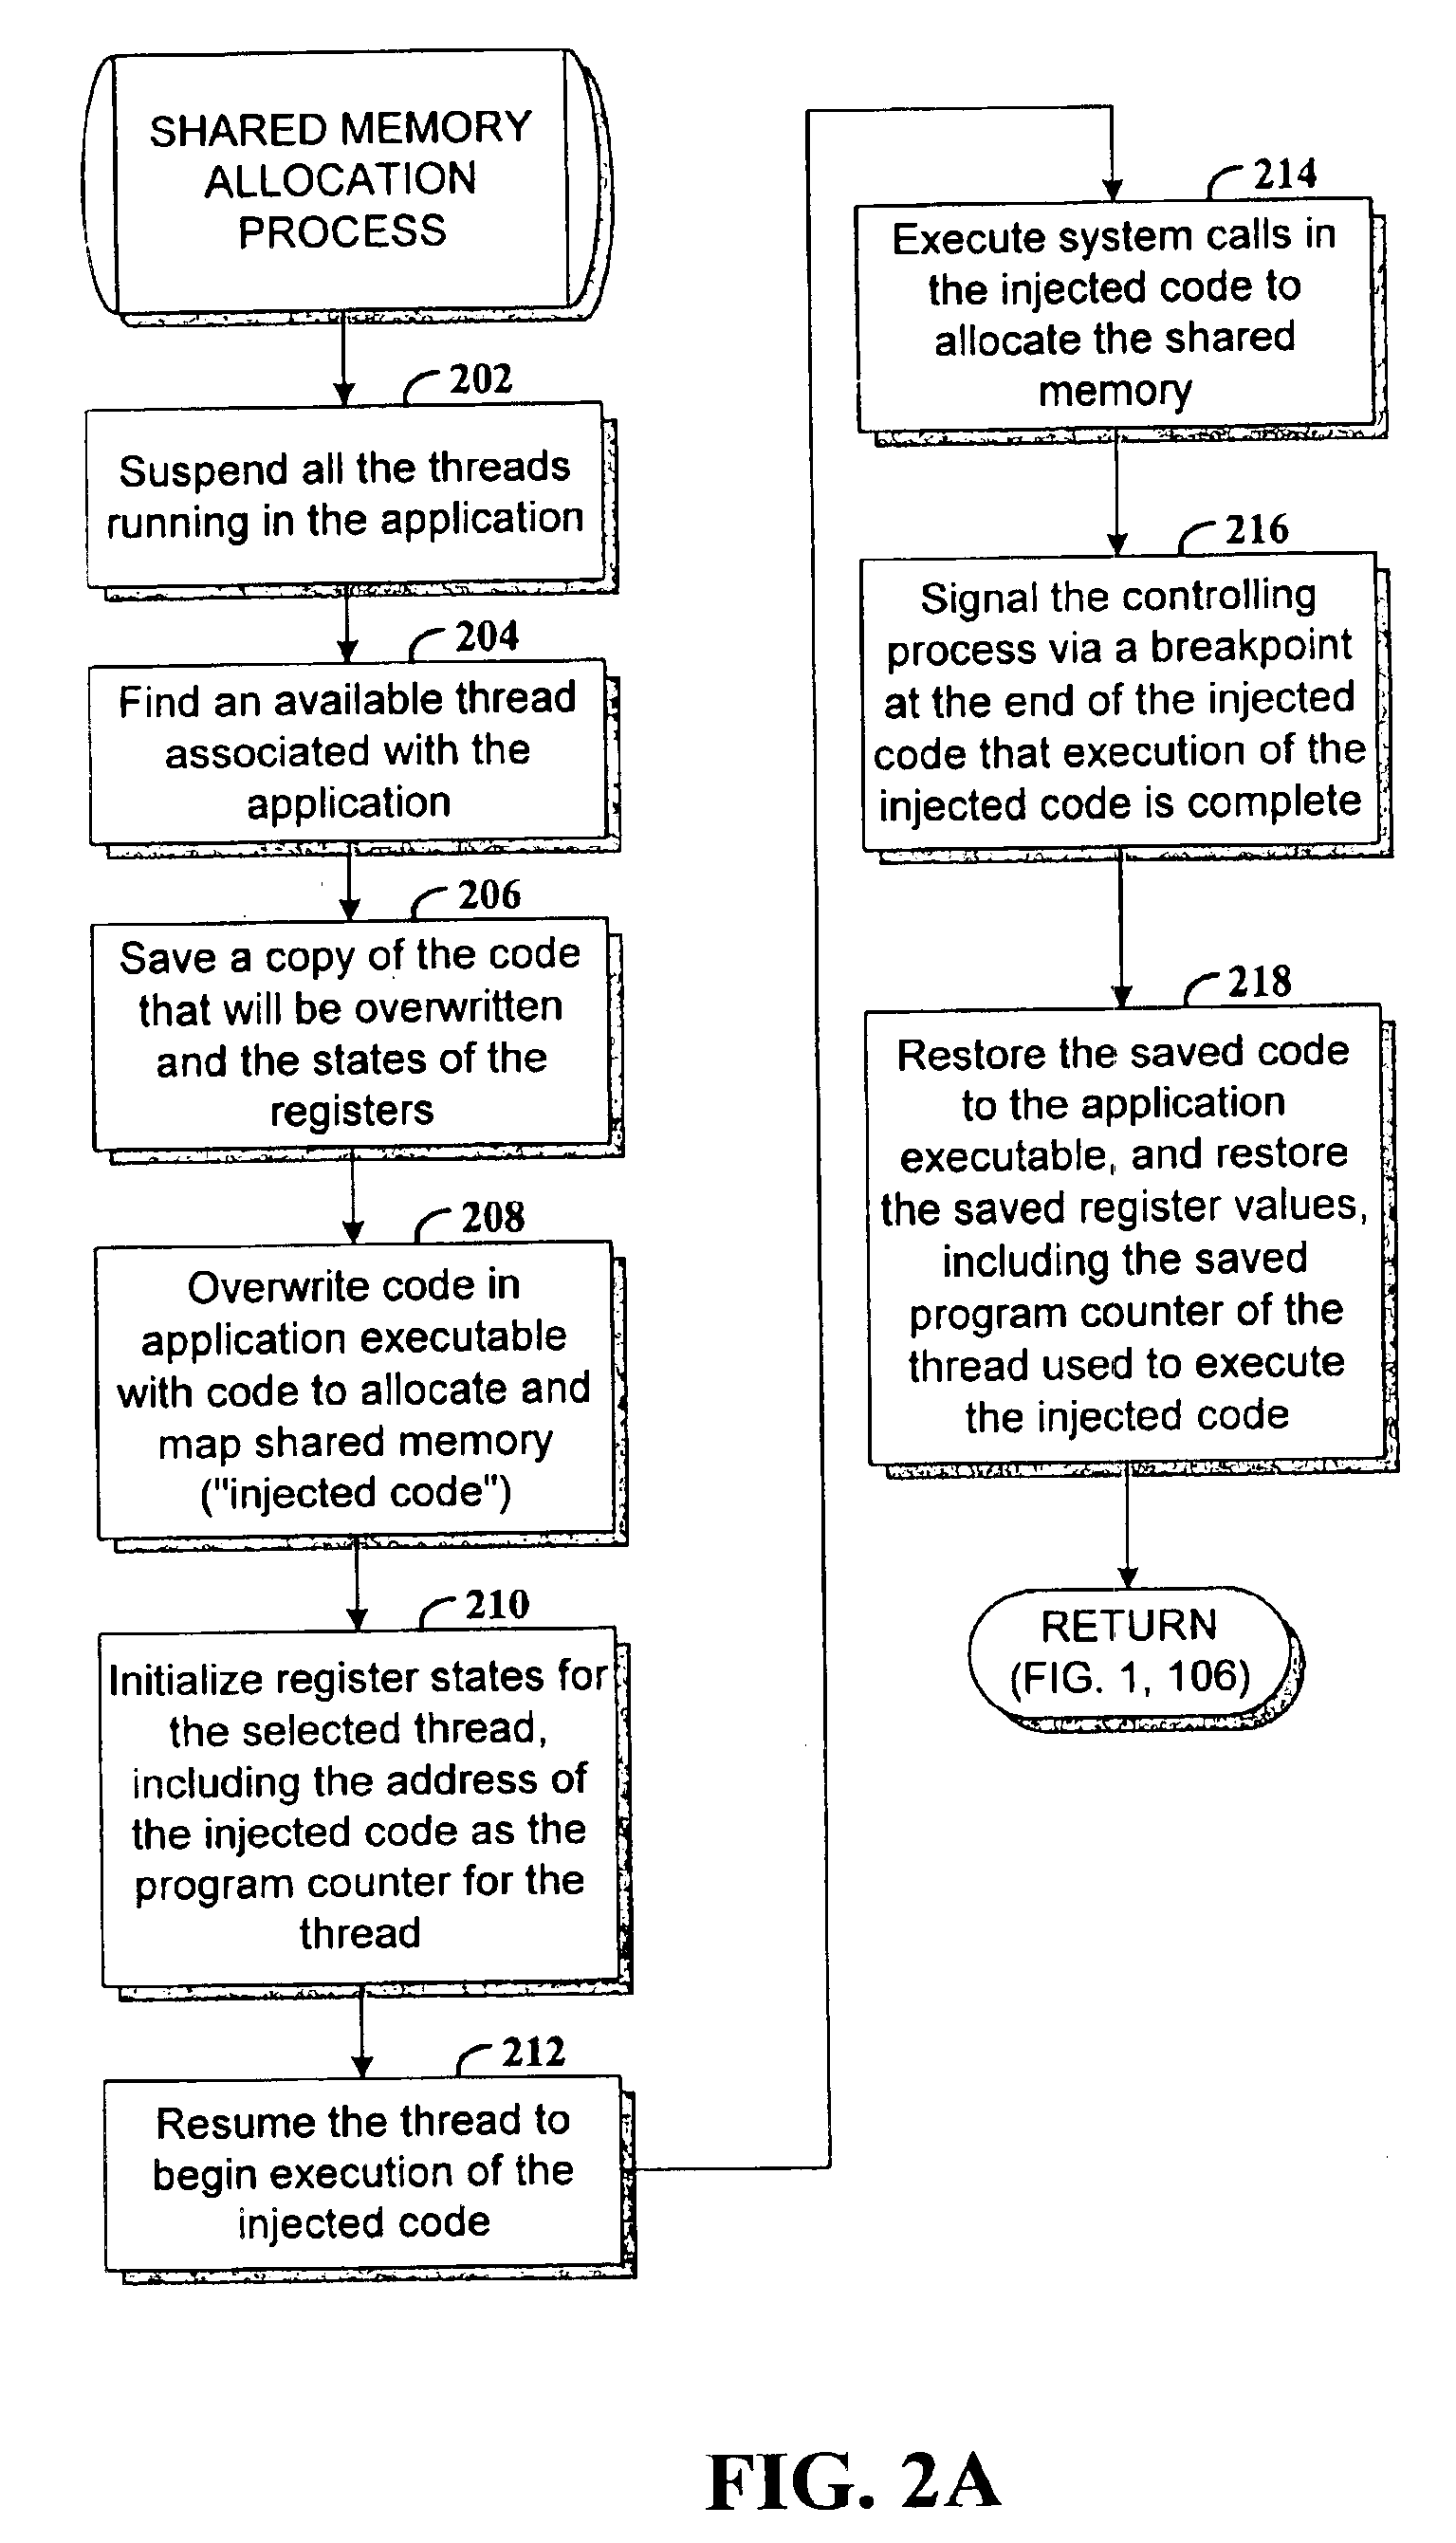 Dynamic instrumentation of an executable program by means of causing a breakpoint at the entry point of a function and providing instrumentation code